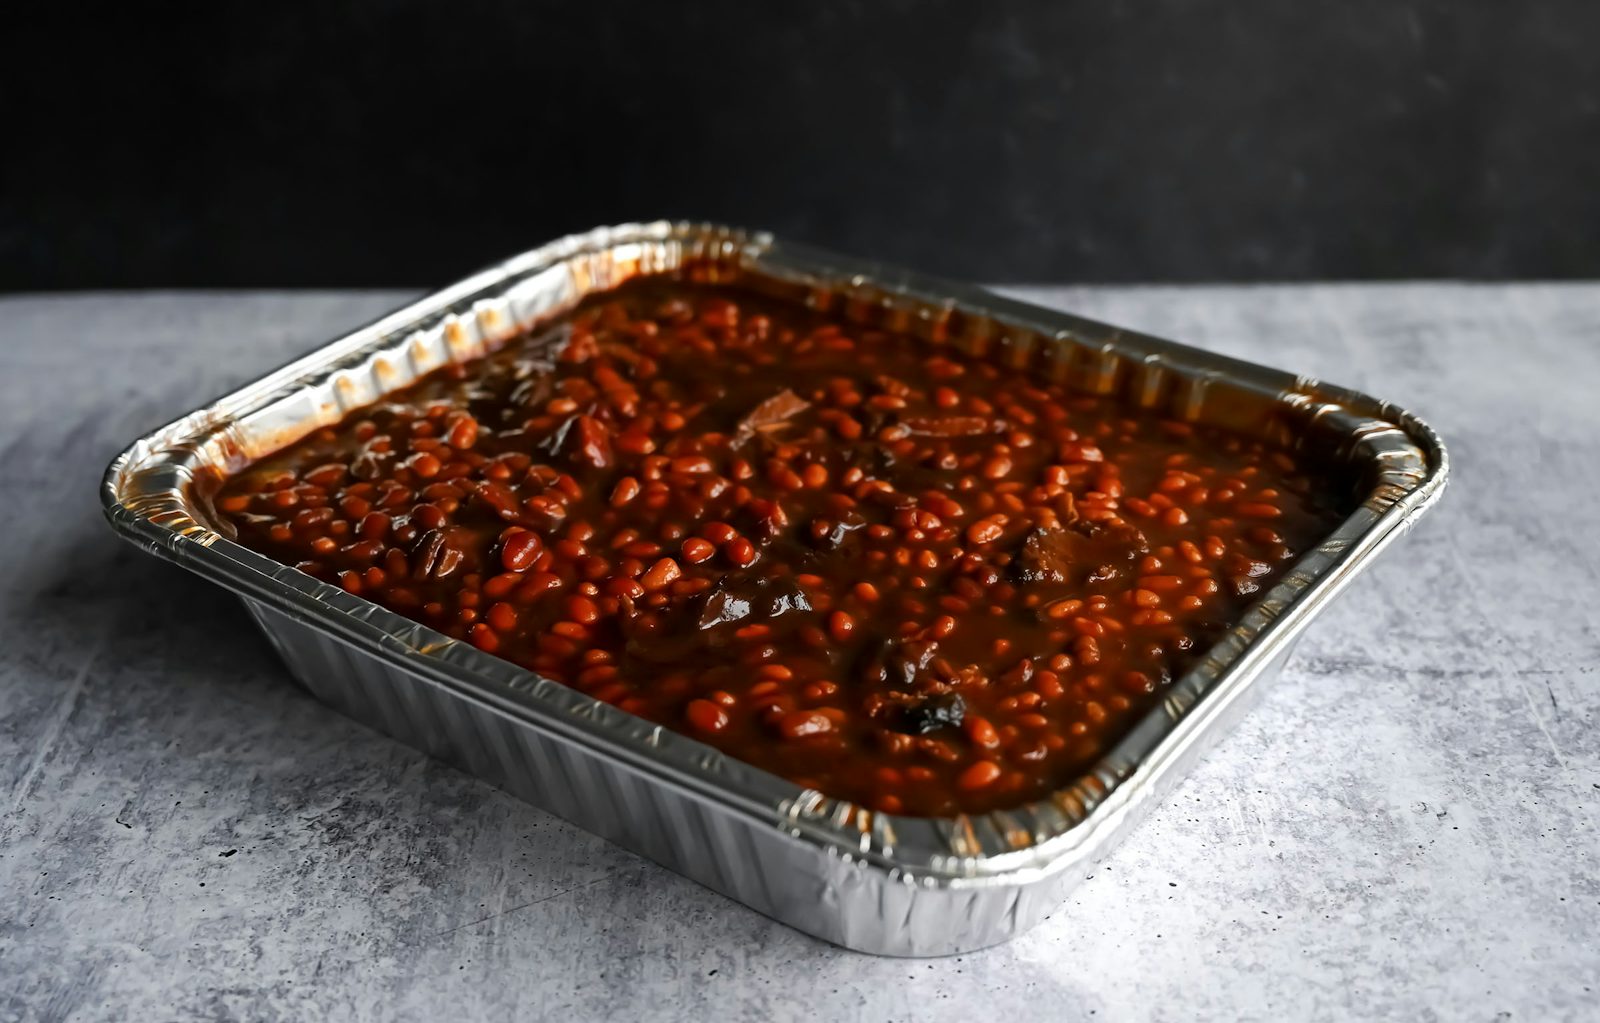 Pan of Baked Beans with Brisket